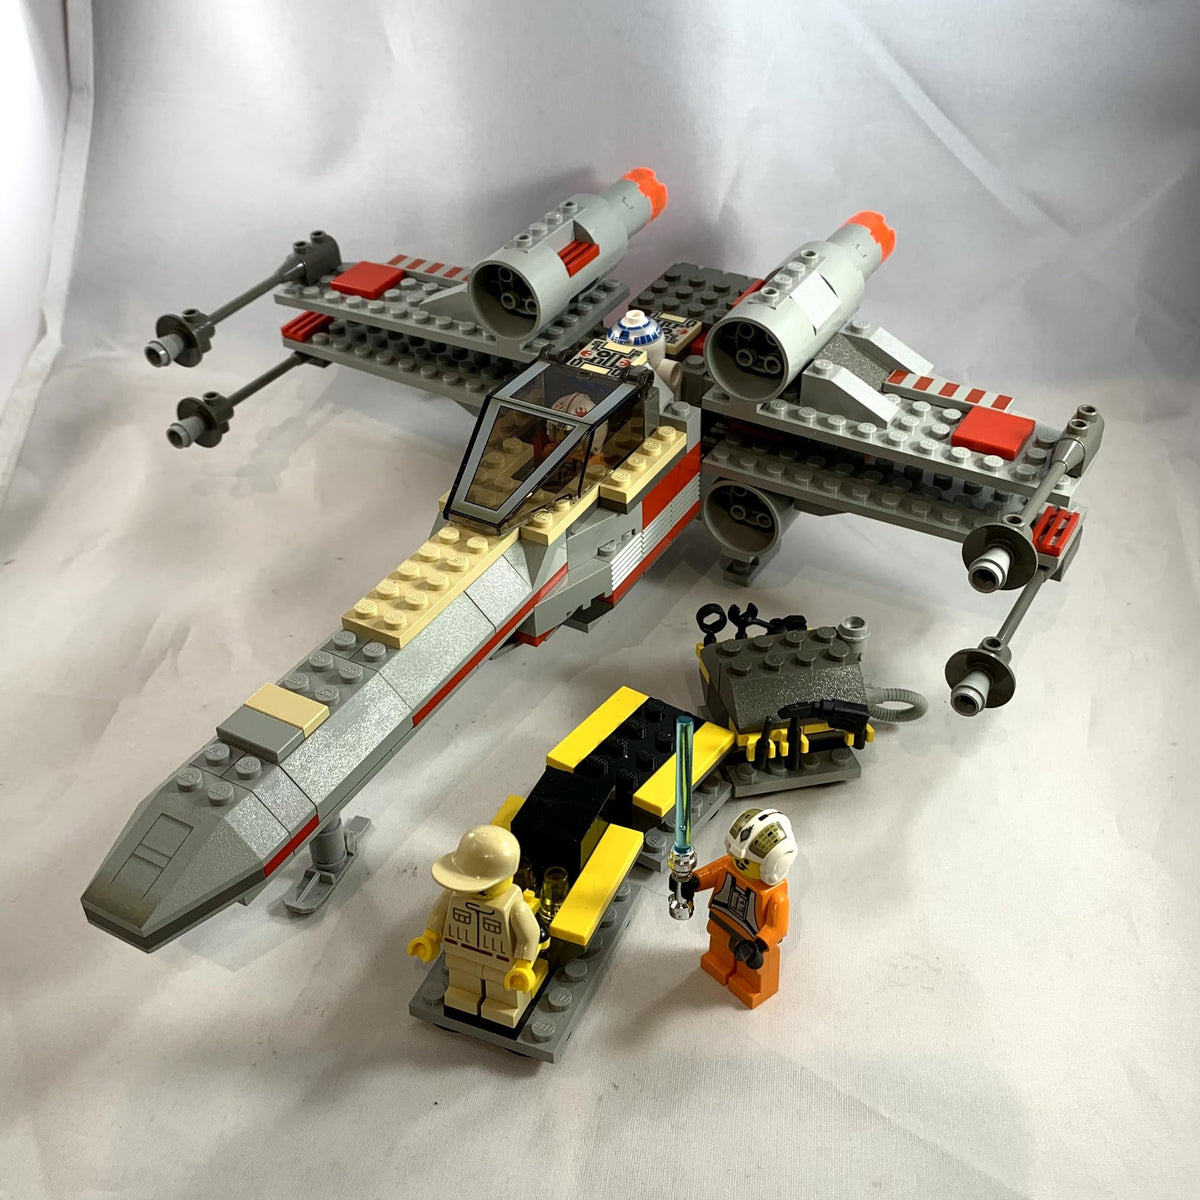 X-wing Fighter - LEGO Star Wars set 7140